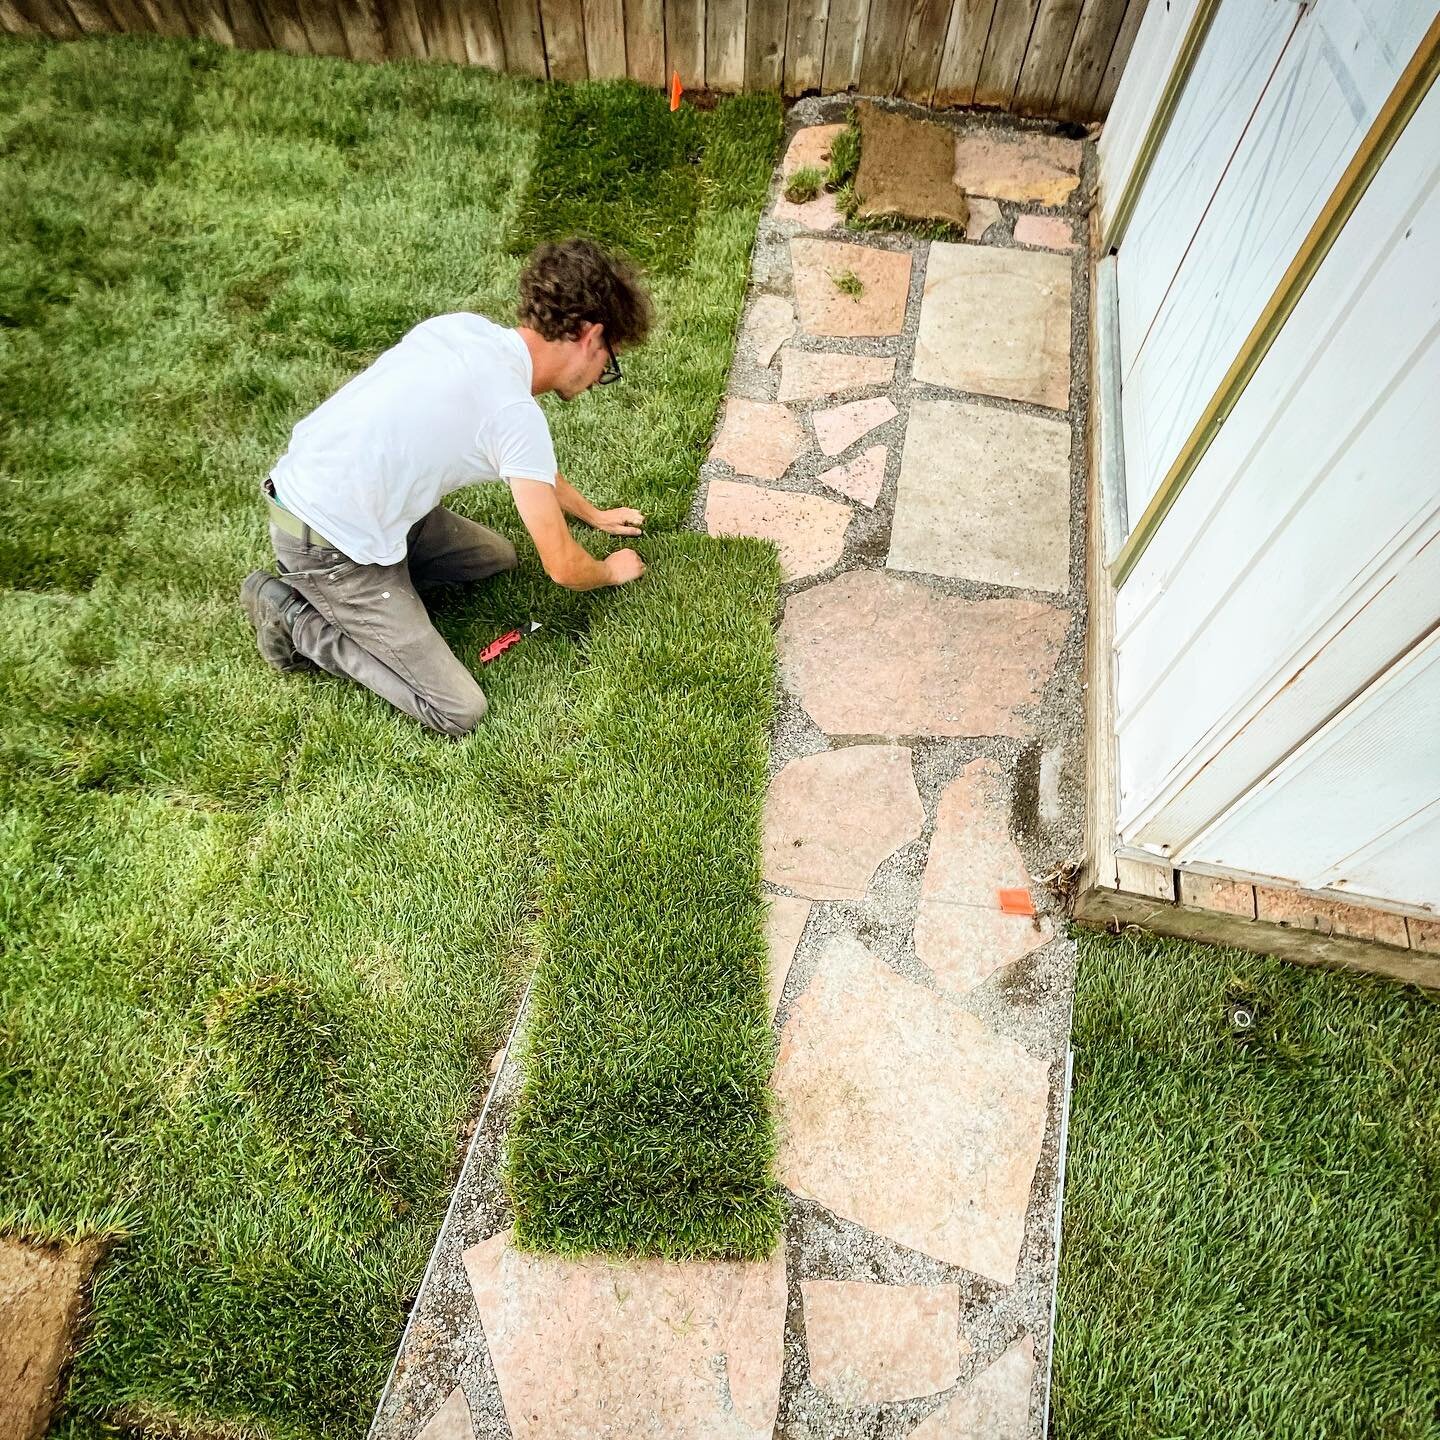 🪨🔨 The #youthscape crew laying down sod at a landscaping project! We are accepting landscaping estimates and scheduling out for August. Connect with our team using the link in bio! 
-
#fortcollinscolorado #greeleycolorado #landscaping #landscapingc